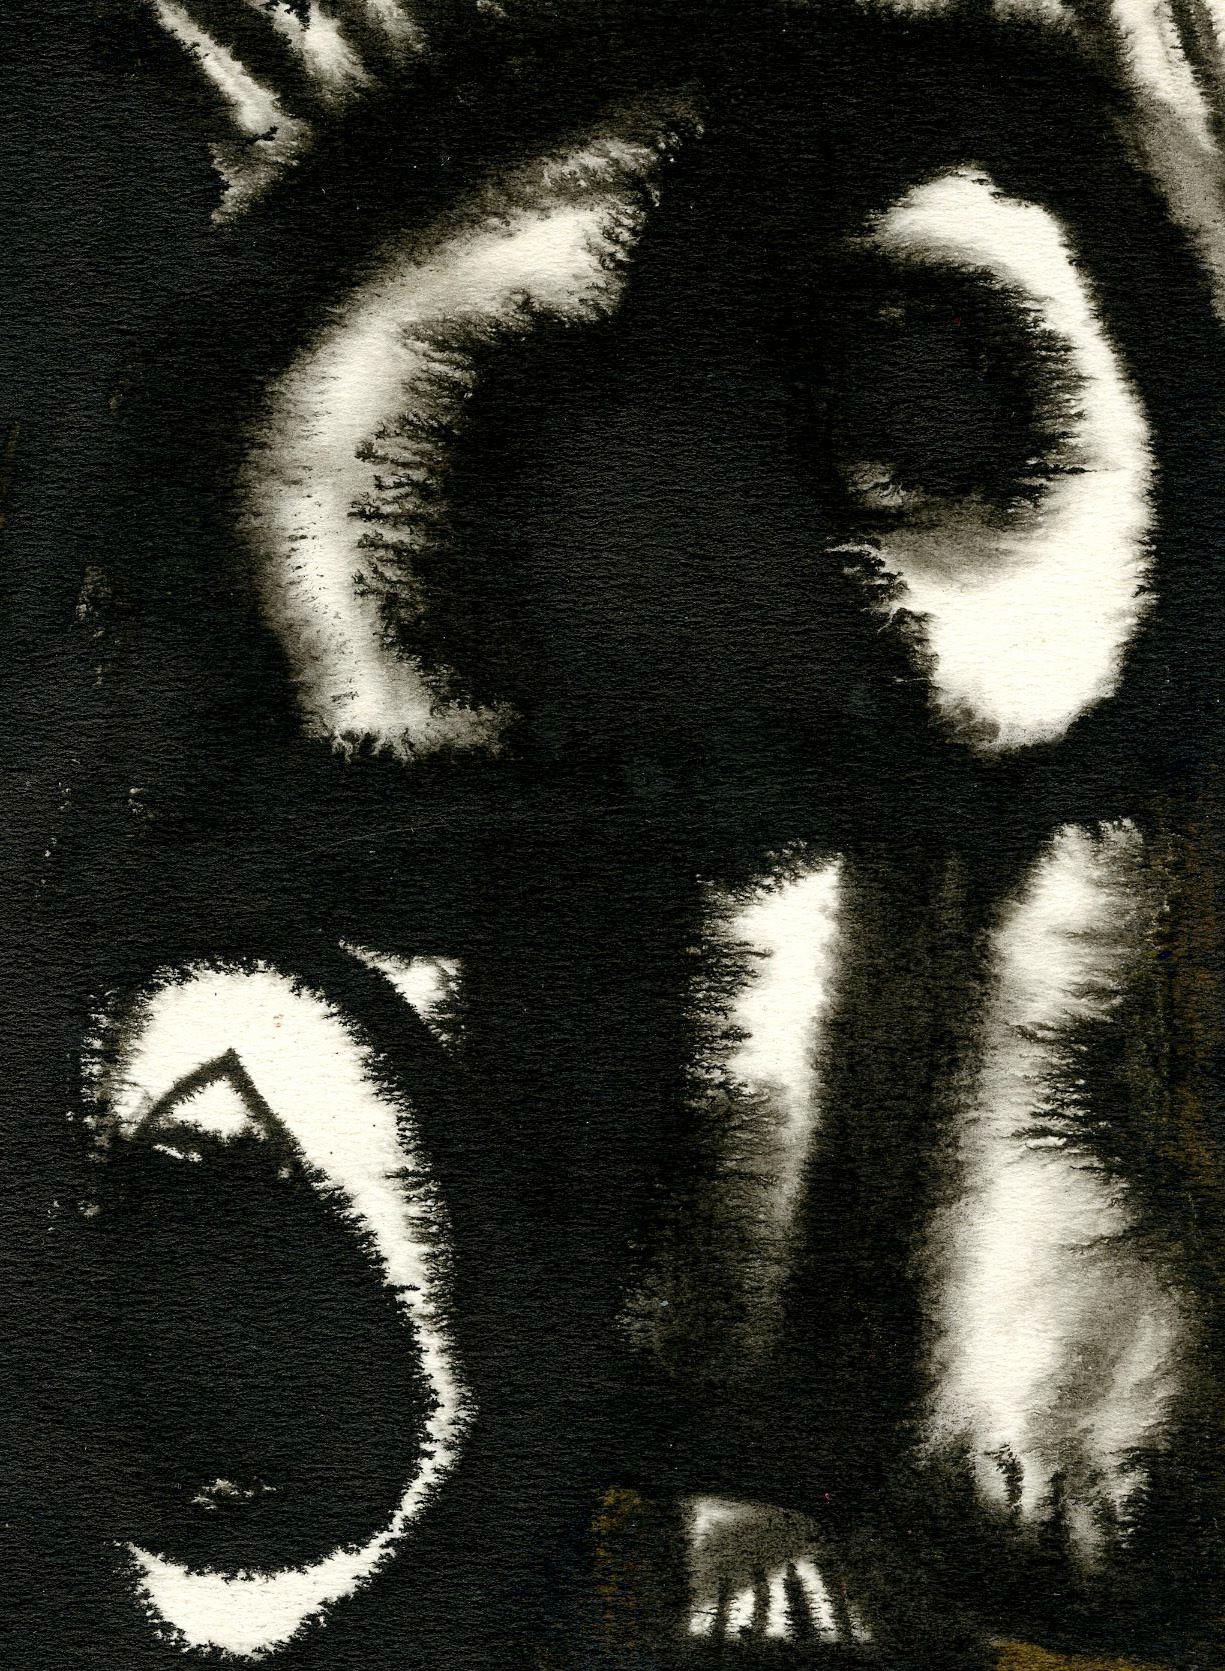 Black and White Cat - Abstract Art by Sam Spanier